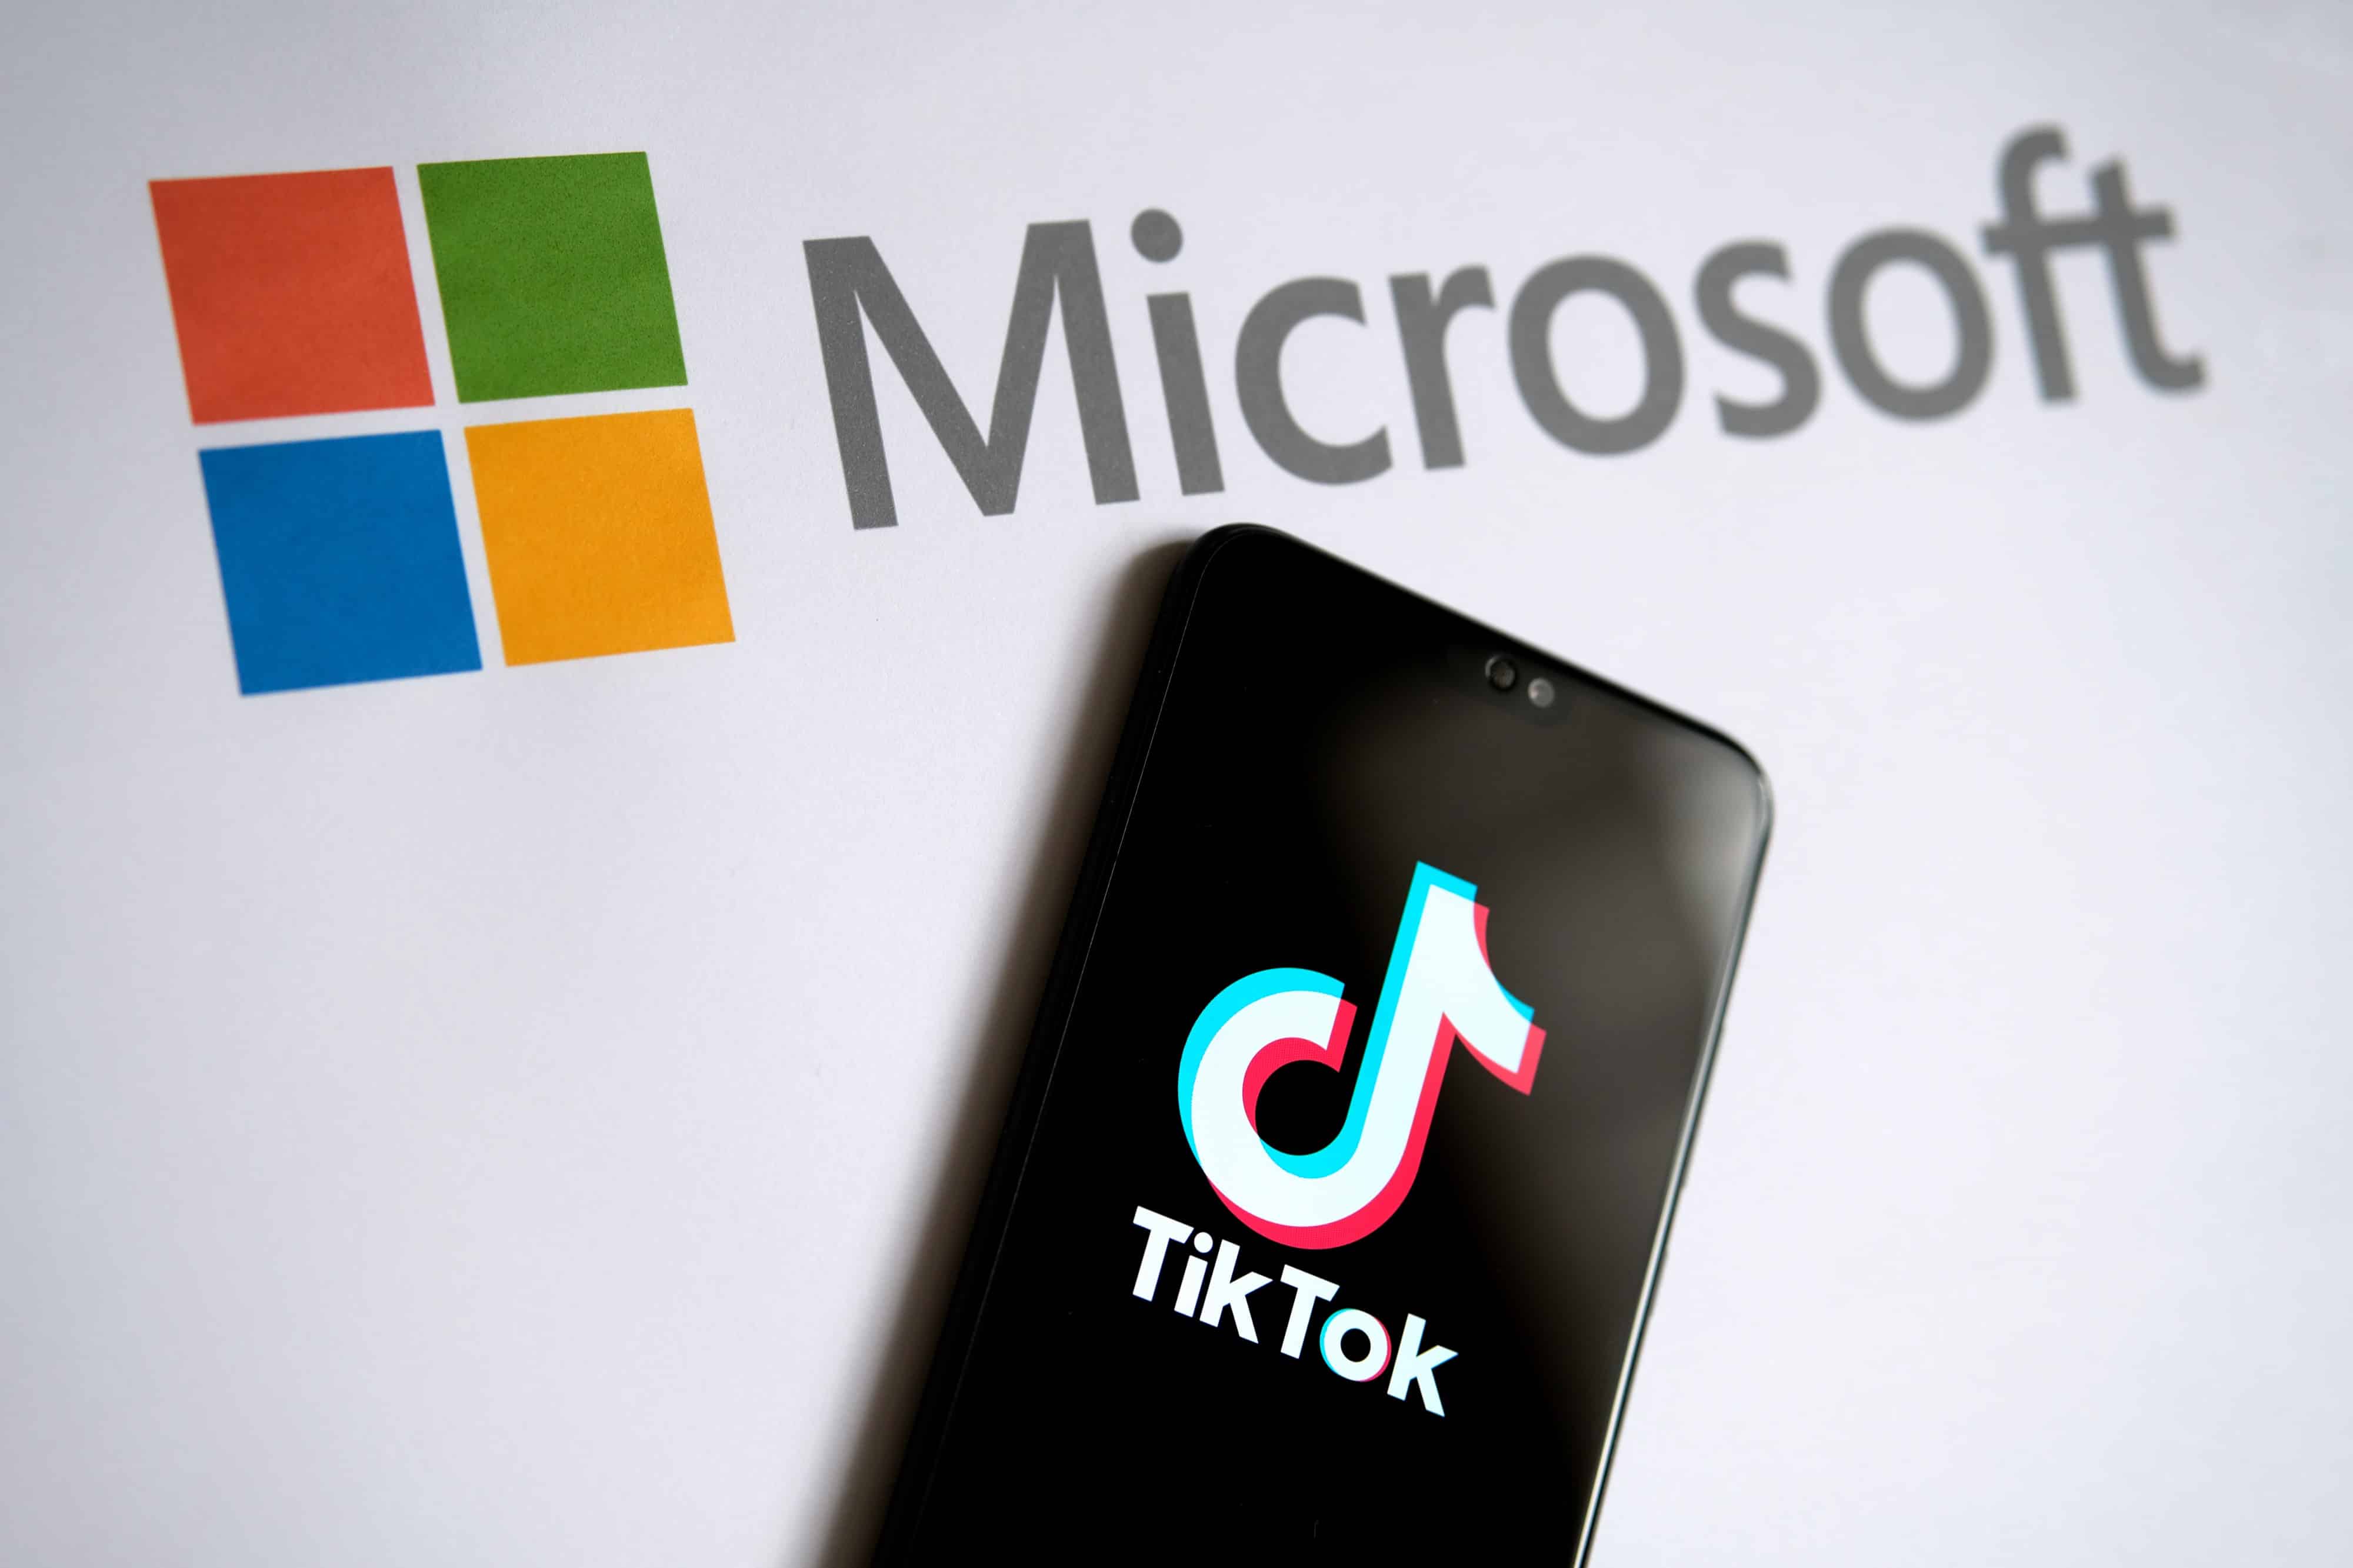 Microsoft TikTok acquisition could end the political football match over the Chinese App